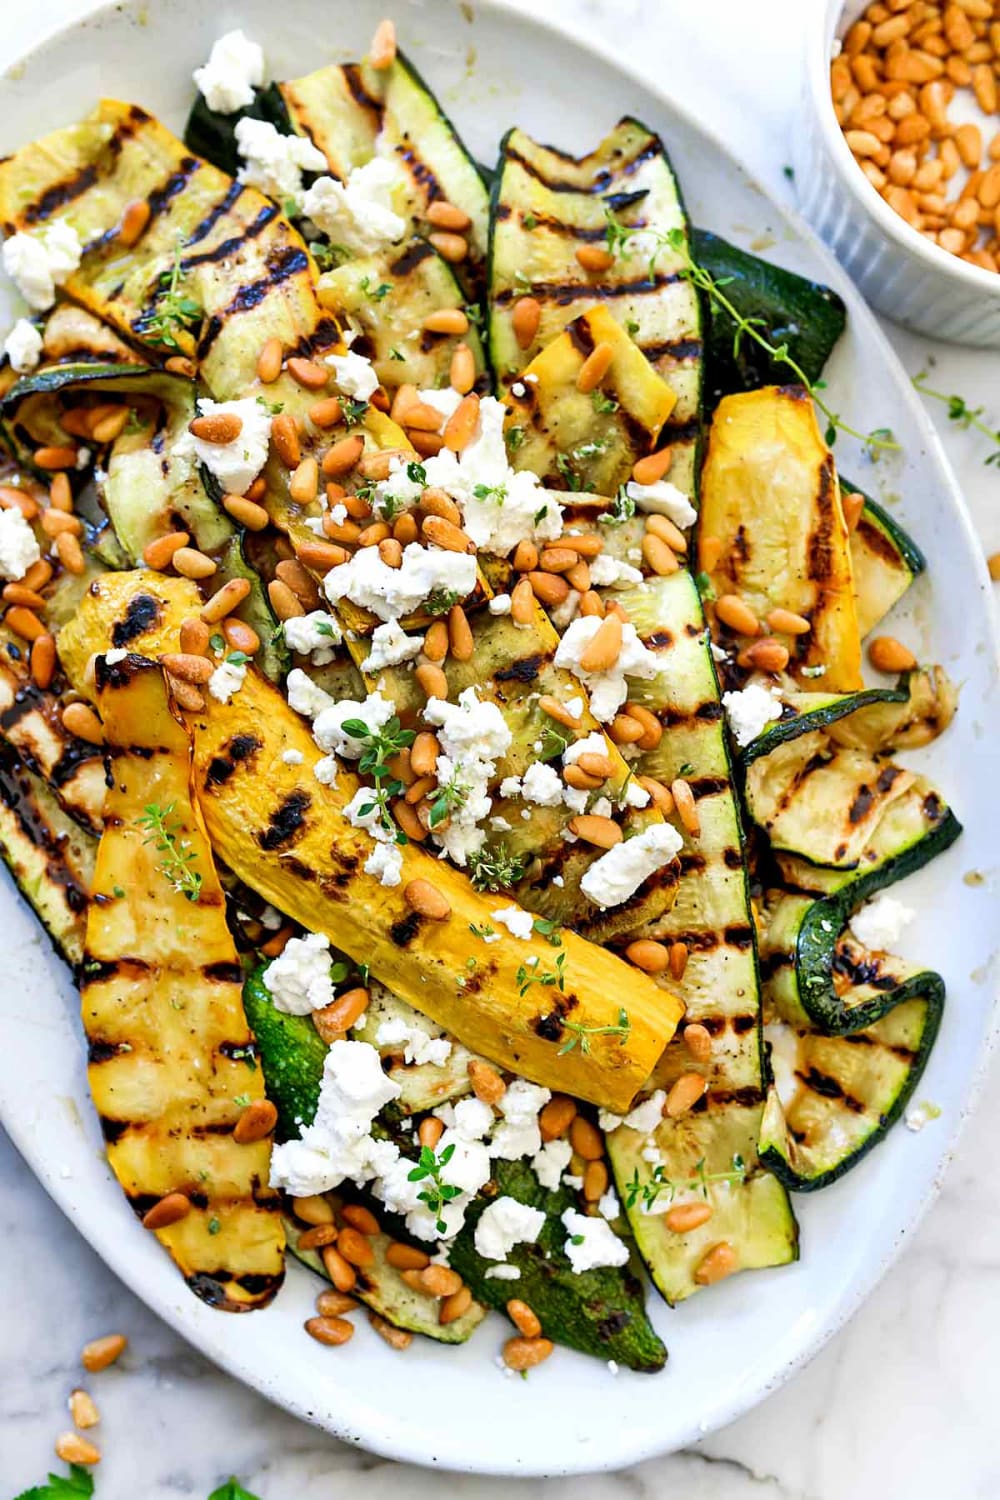 39 Vegan Grill Recipes That Will Make You Want to Live a Plant-Based Life